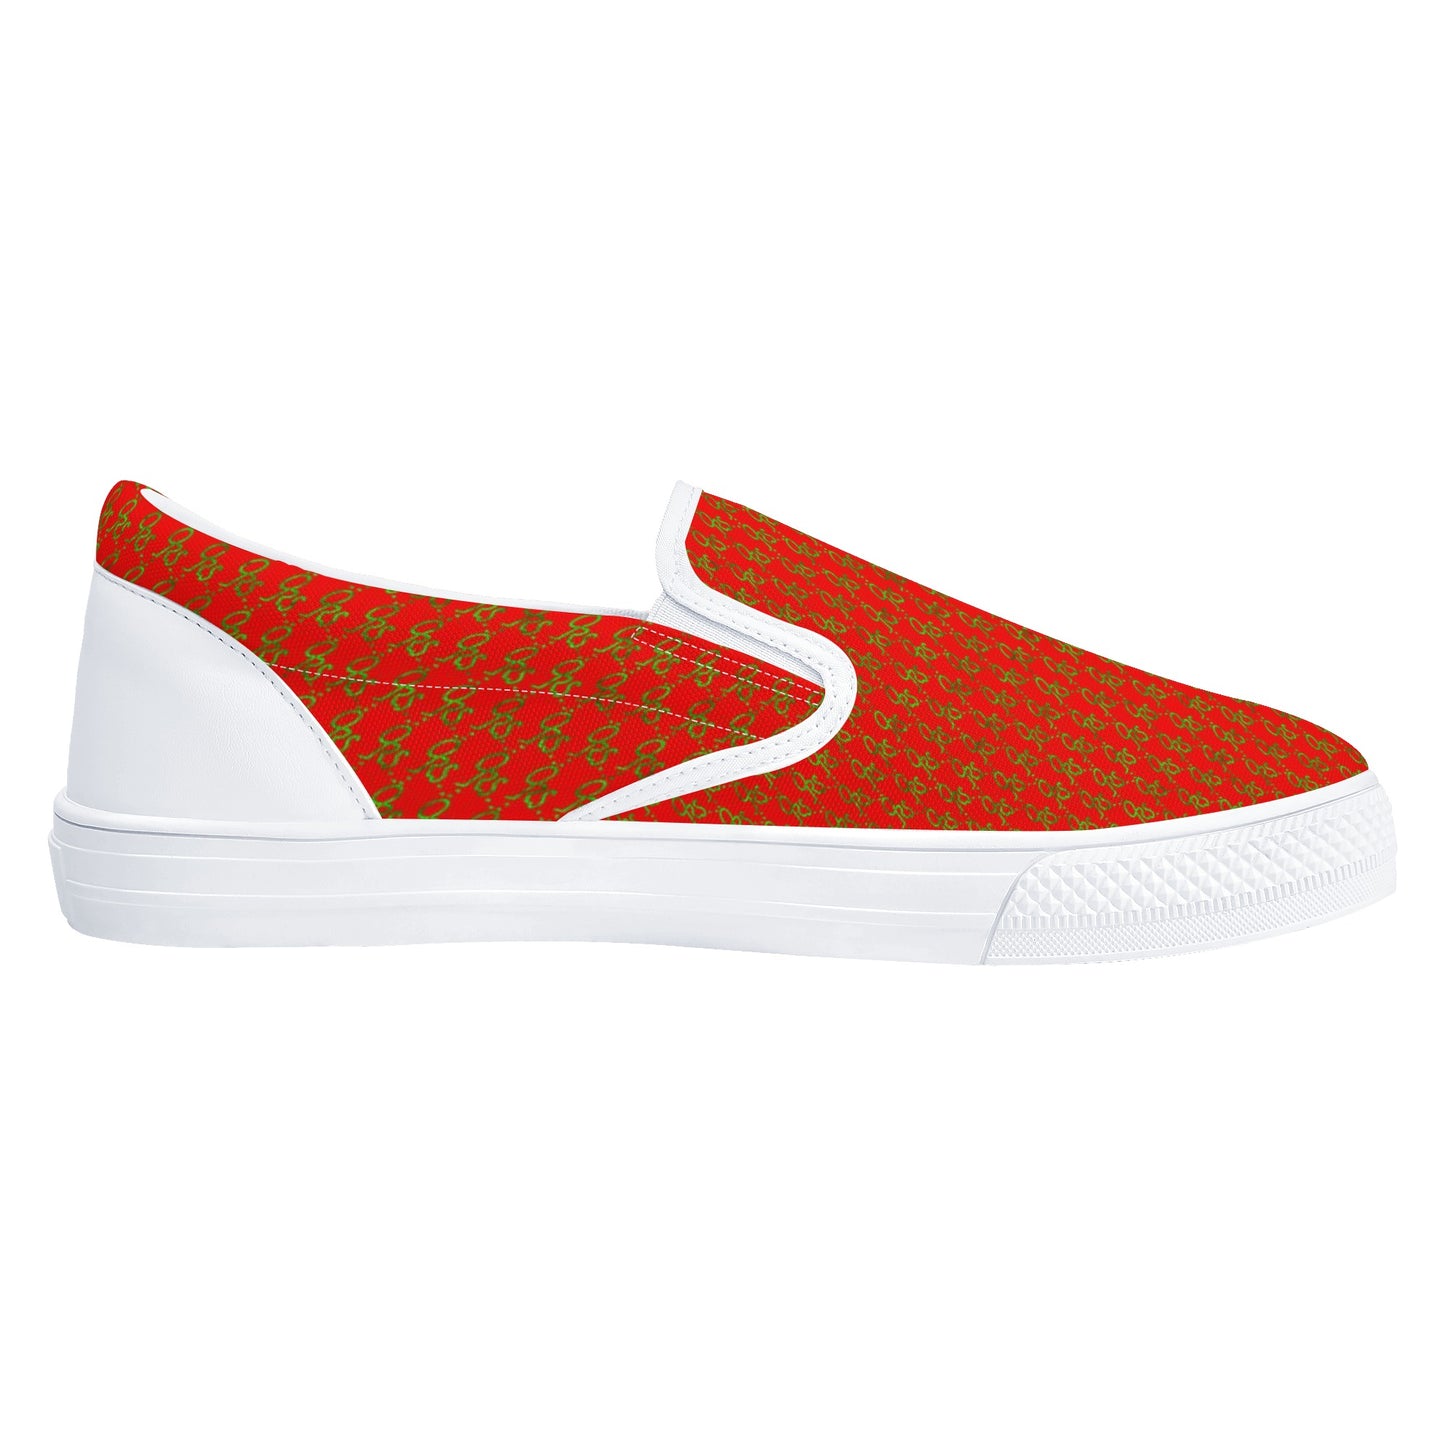 Men's Red ORS Slip On Shoes - ONE RUN SPORTS LLC